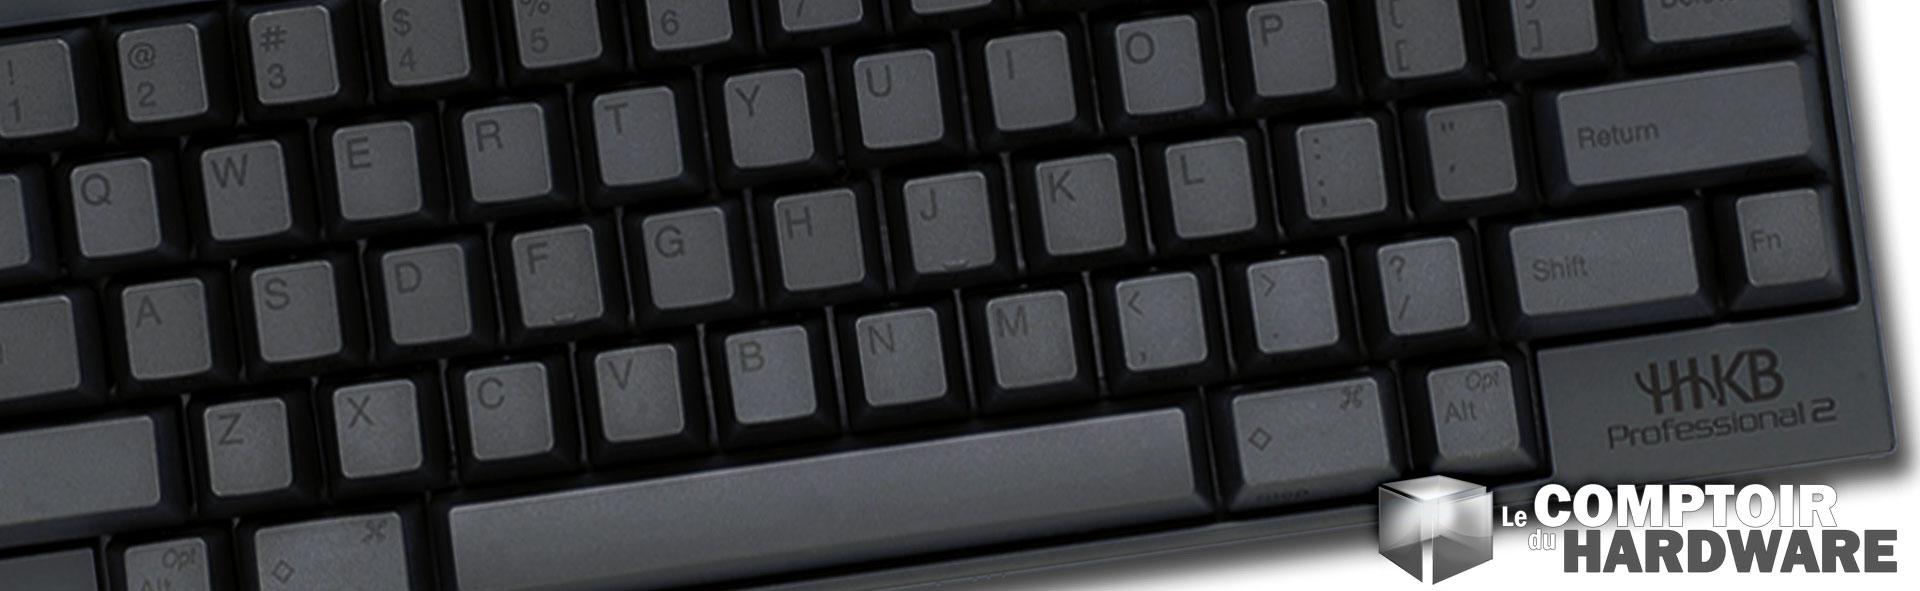 review happy hacking keyboard profesionnal 2